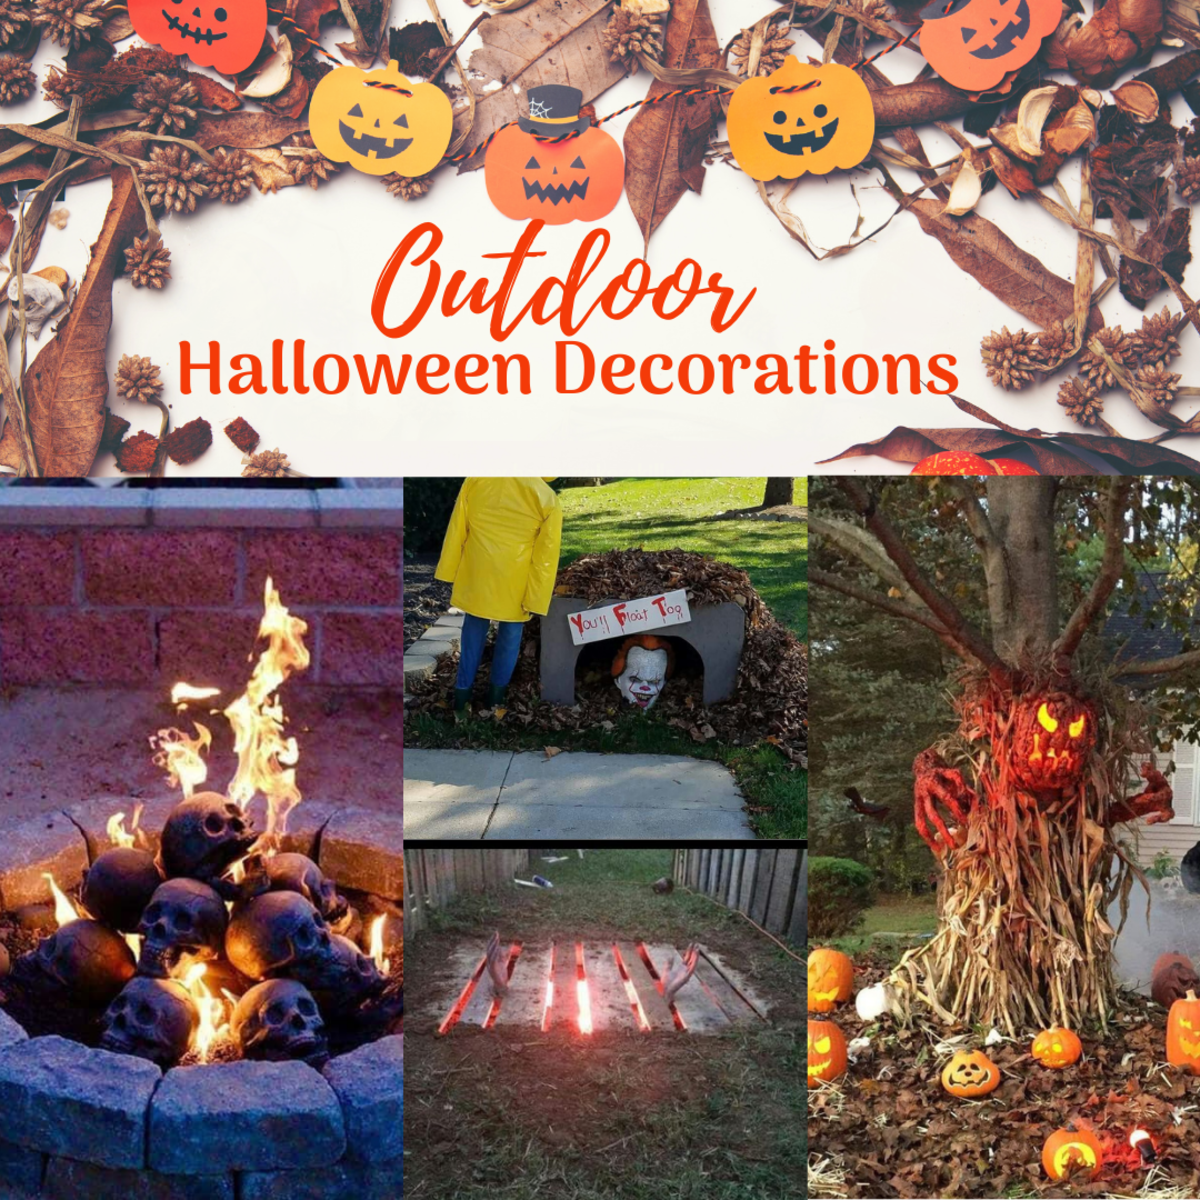 30+ Budget Friendly DIY Outdoor Halloween Decorations that are Eerily Fun to Make